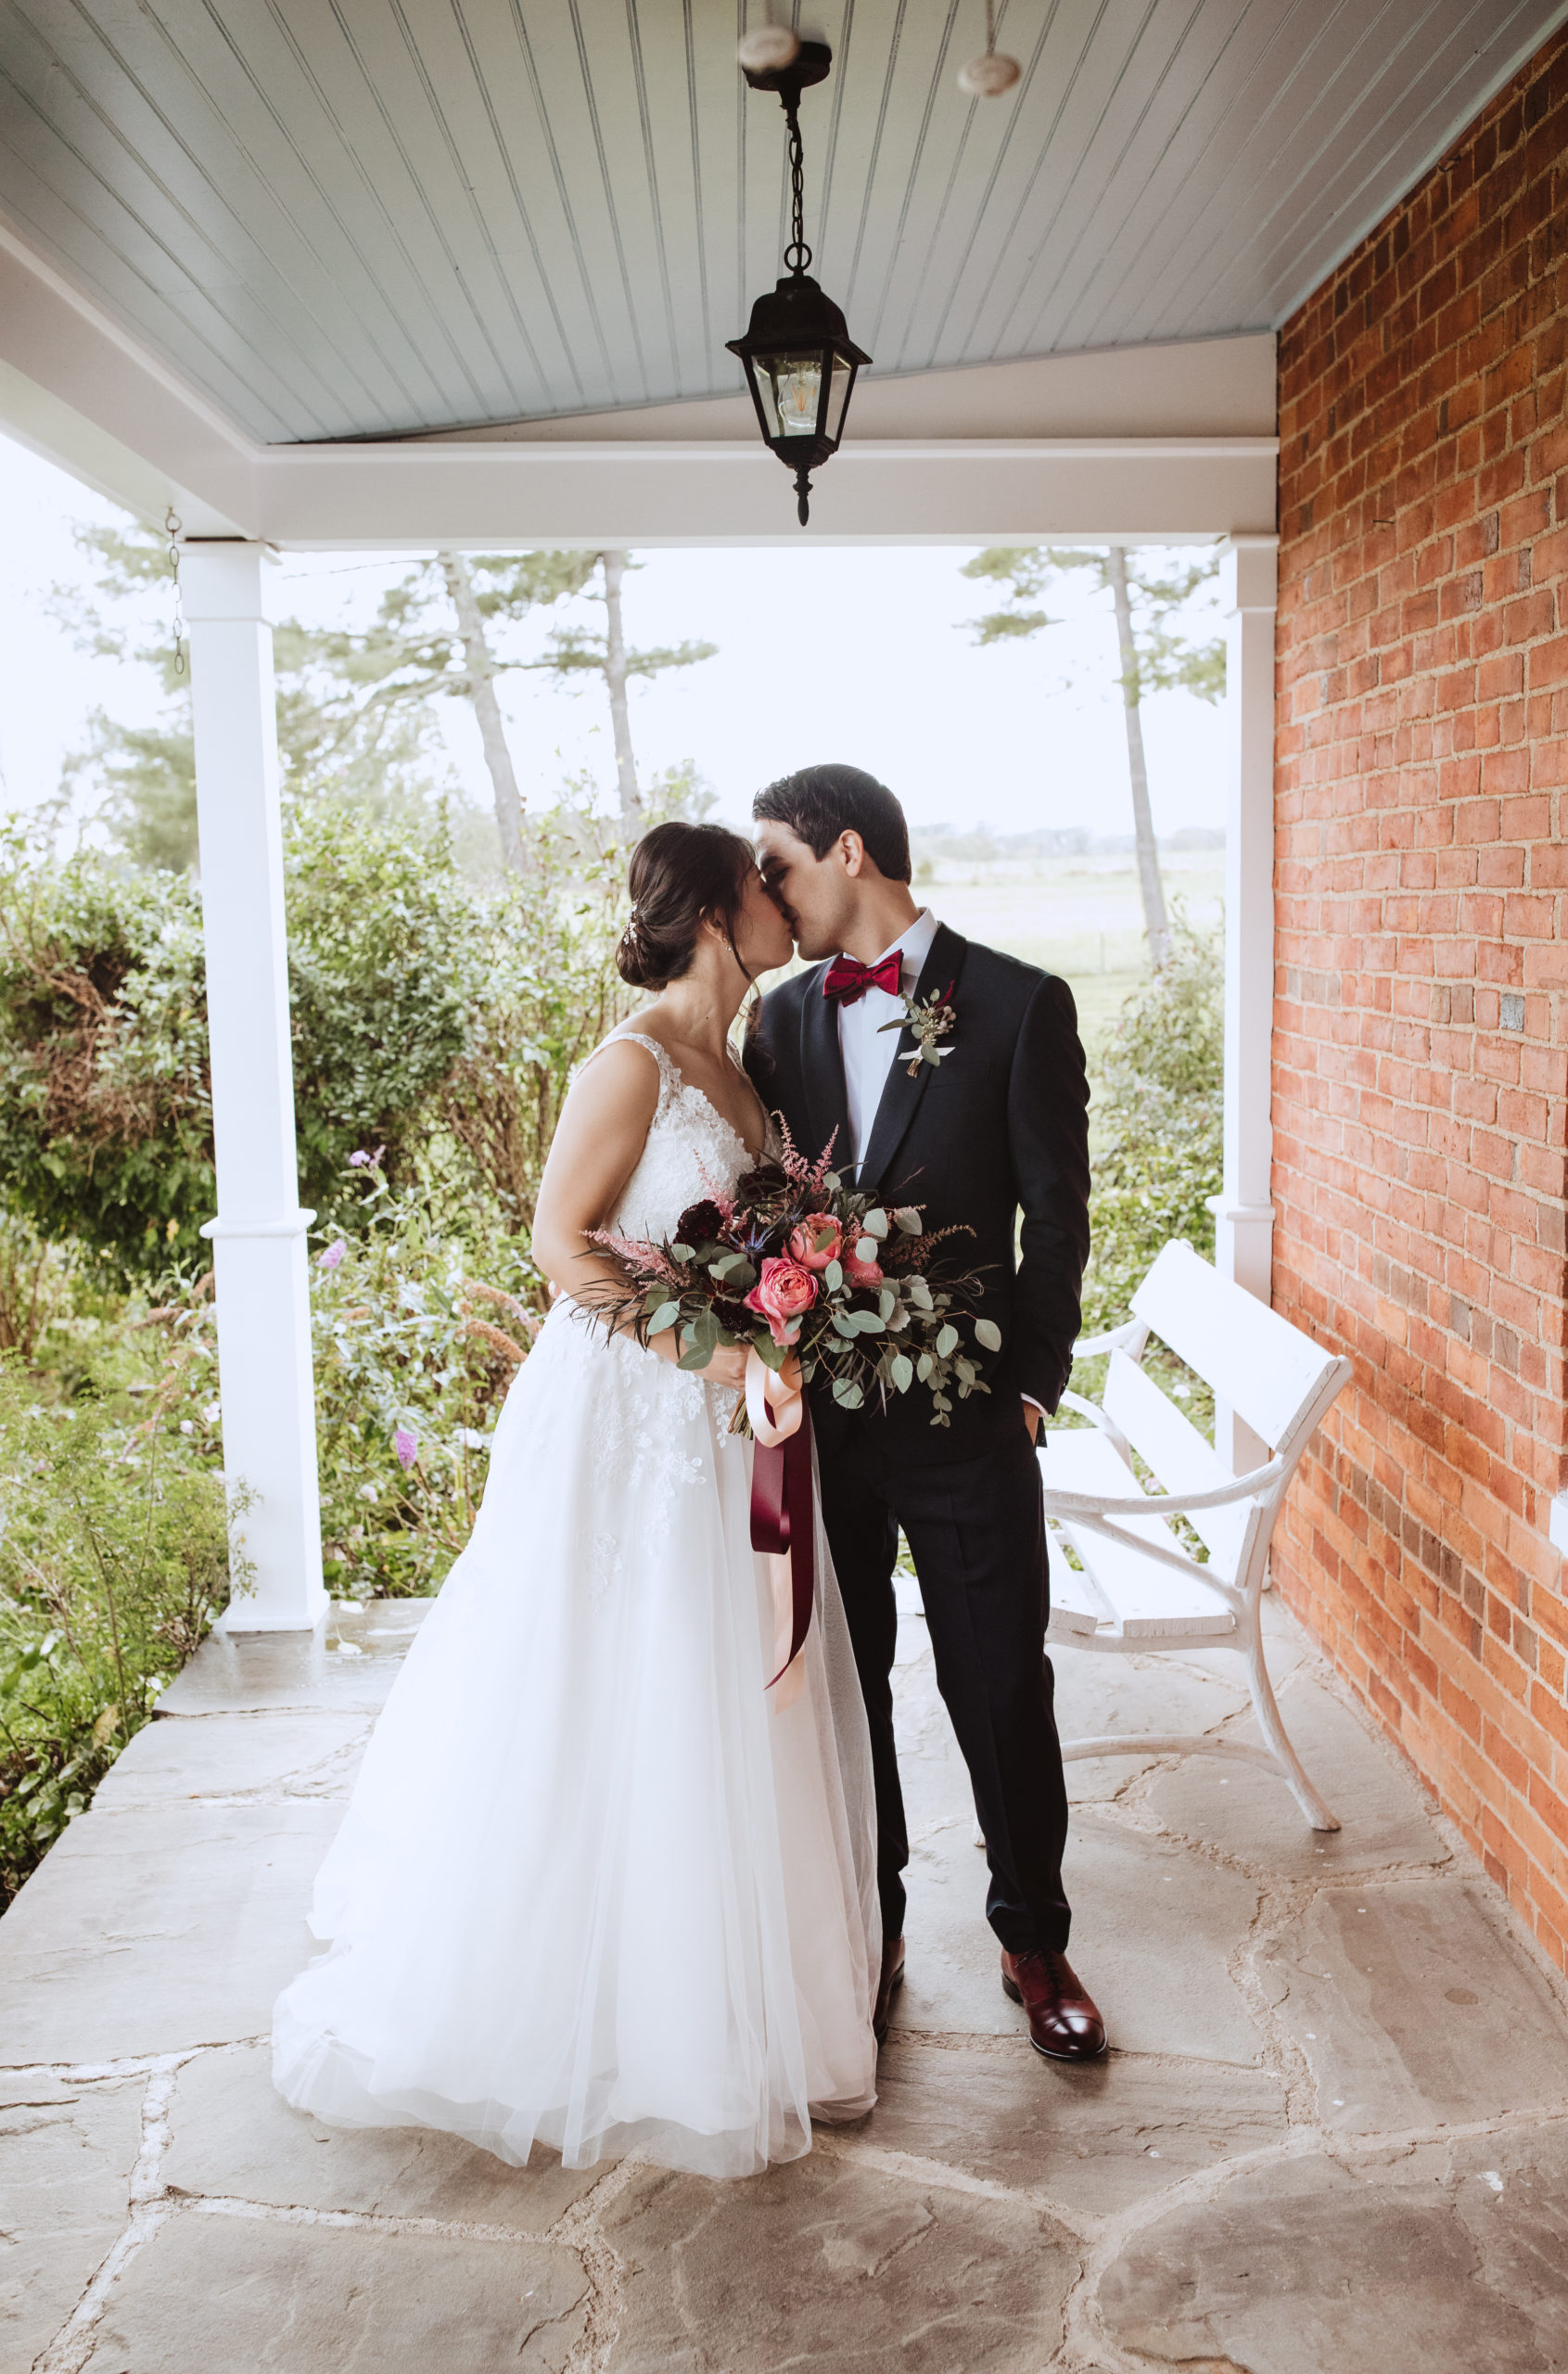 bride and groom kissing in the farmhouse porch. Bride is holding a garden style hand tie bouquet